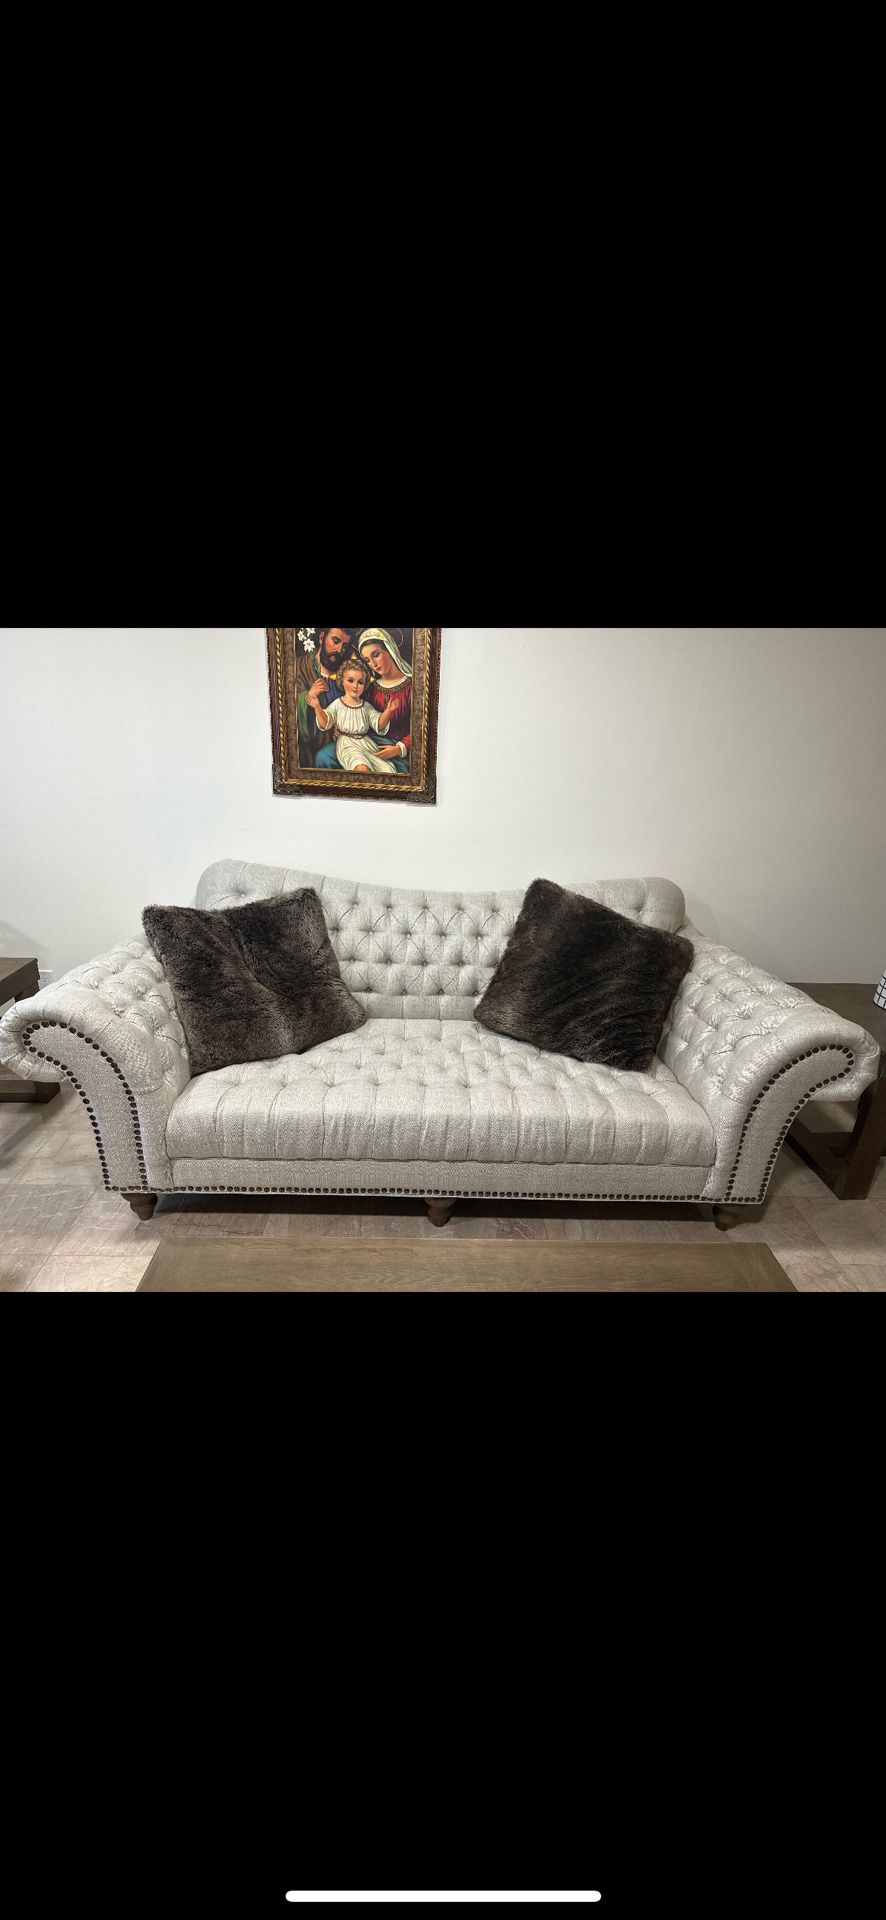 3 Piece grey tufted couch set